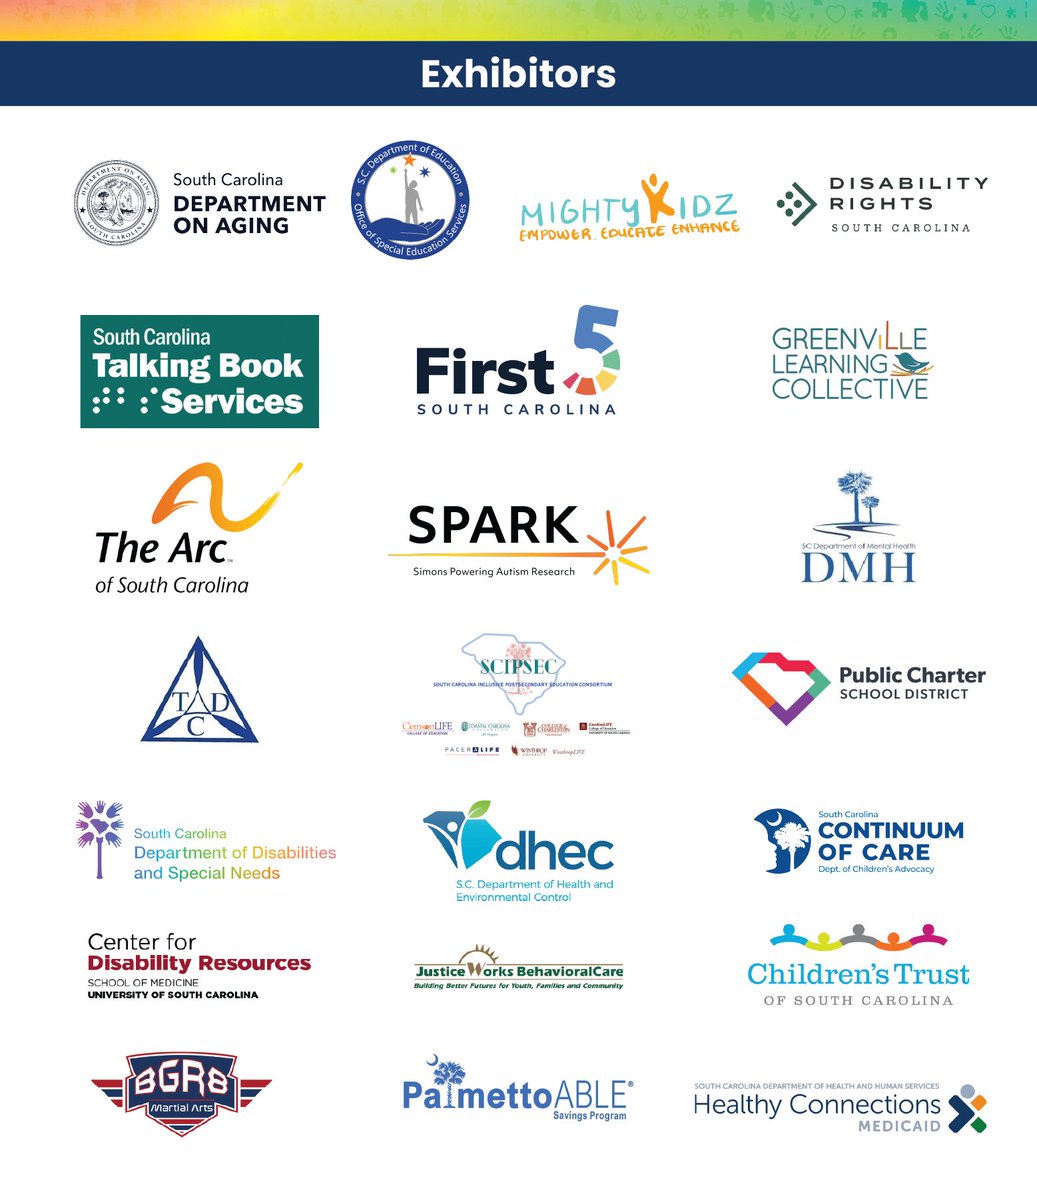 With just a few days until AutismConnect, we want to thank our 40+ exhibitors who will be providing important information for families and professionals! @SCDDCouncil, @scdhec, @DisabilityRtsSC, ABLE Kids, @aboutplaysc, @canresearchSC, @SCAIHS, @AgingWithFlair, All Caregivers,…